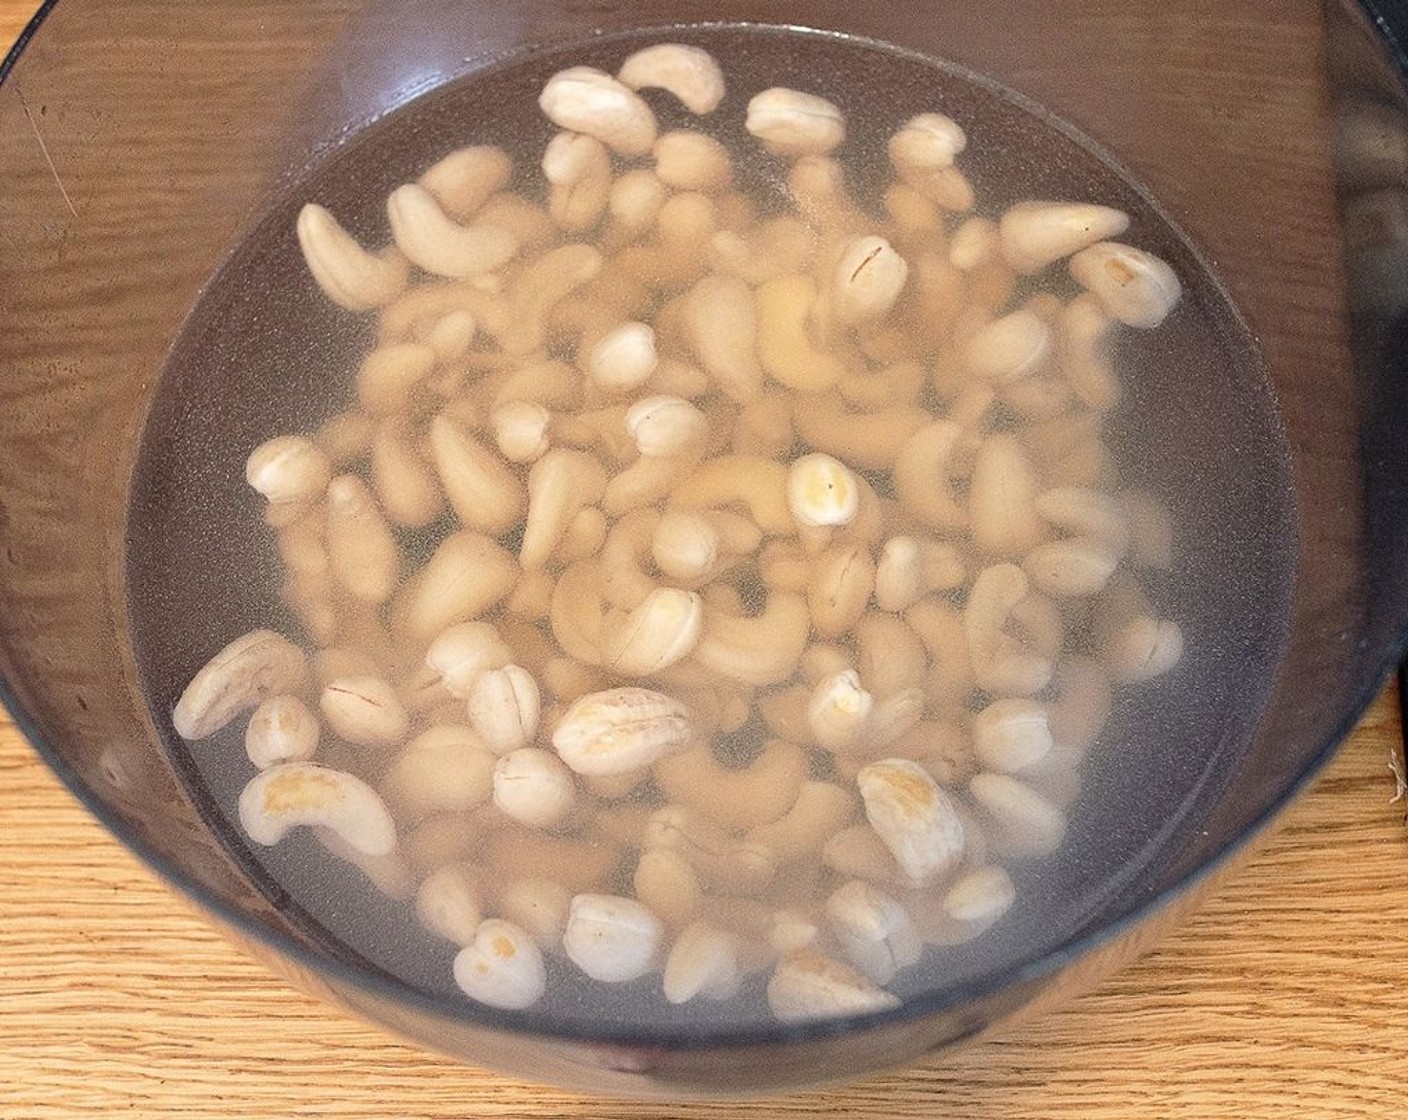 step 2 Soak the Raw Cashews (1 cup) in boiling hot water for 30 minutes, or in lukewarm water overnight.